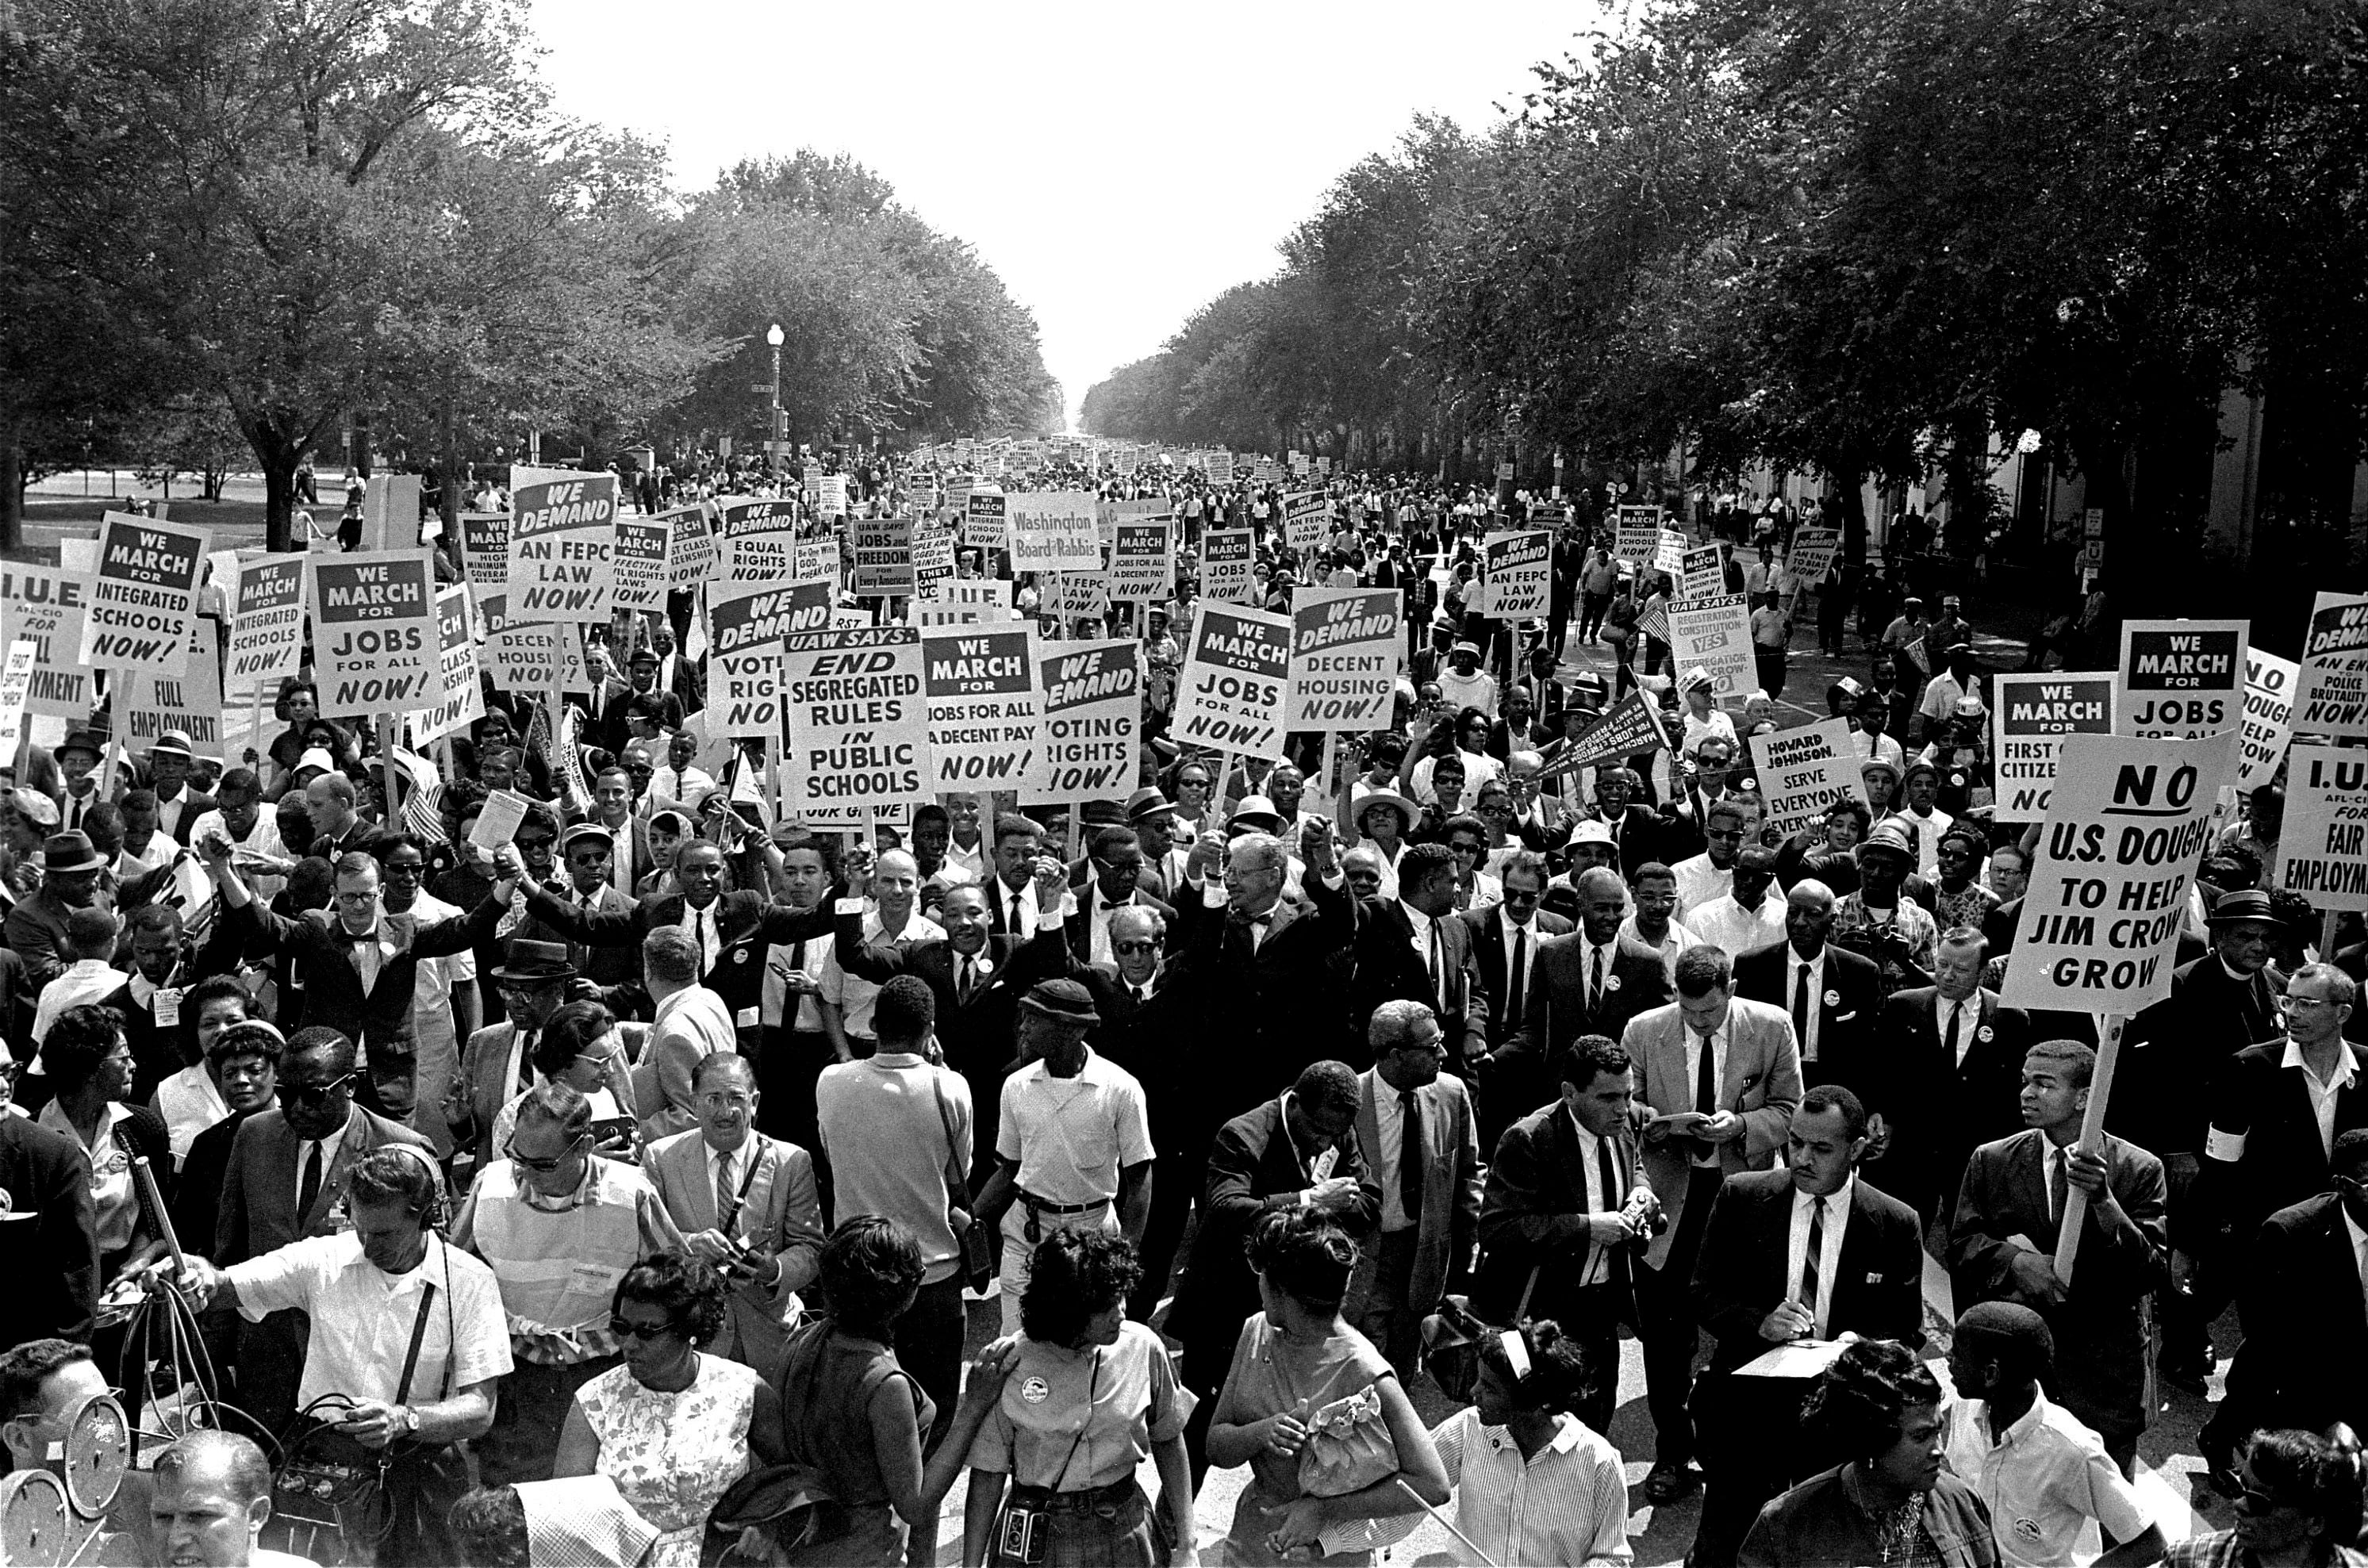 FILE - In this Aug. 28, 1963, file photo Dr. Martin Luther King Jr., center left with arms raised, marches along Constitution Avenue with other civil rights protestors carrying placards, from the Washington Monument to the Lincoln Memorial during the March on Washington. The annual celebration of the Martin Luther King Jr. holiday in his hometown in Atlanta is calling for renewed dedication to nonviolence following a turbulent year. The slain civil rights leader's daughter, the Rev. Bernice King, said in an online church service Monday, Jan. 18, 2021, that physical violence and hateful speech are out of control in the aftermath of a divisive election followed by a deadly siege on the U.S. Capitol in Washington by supporters of President Donald Trump. (AP Photo, File)